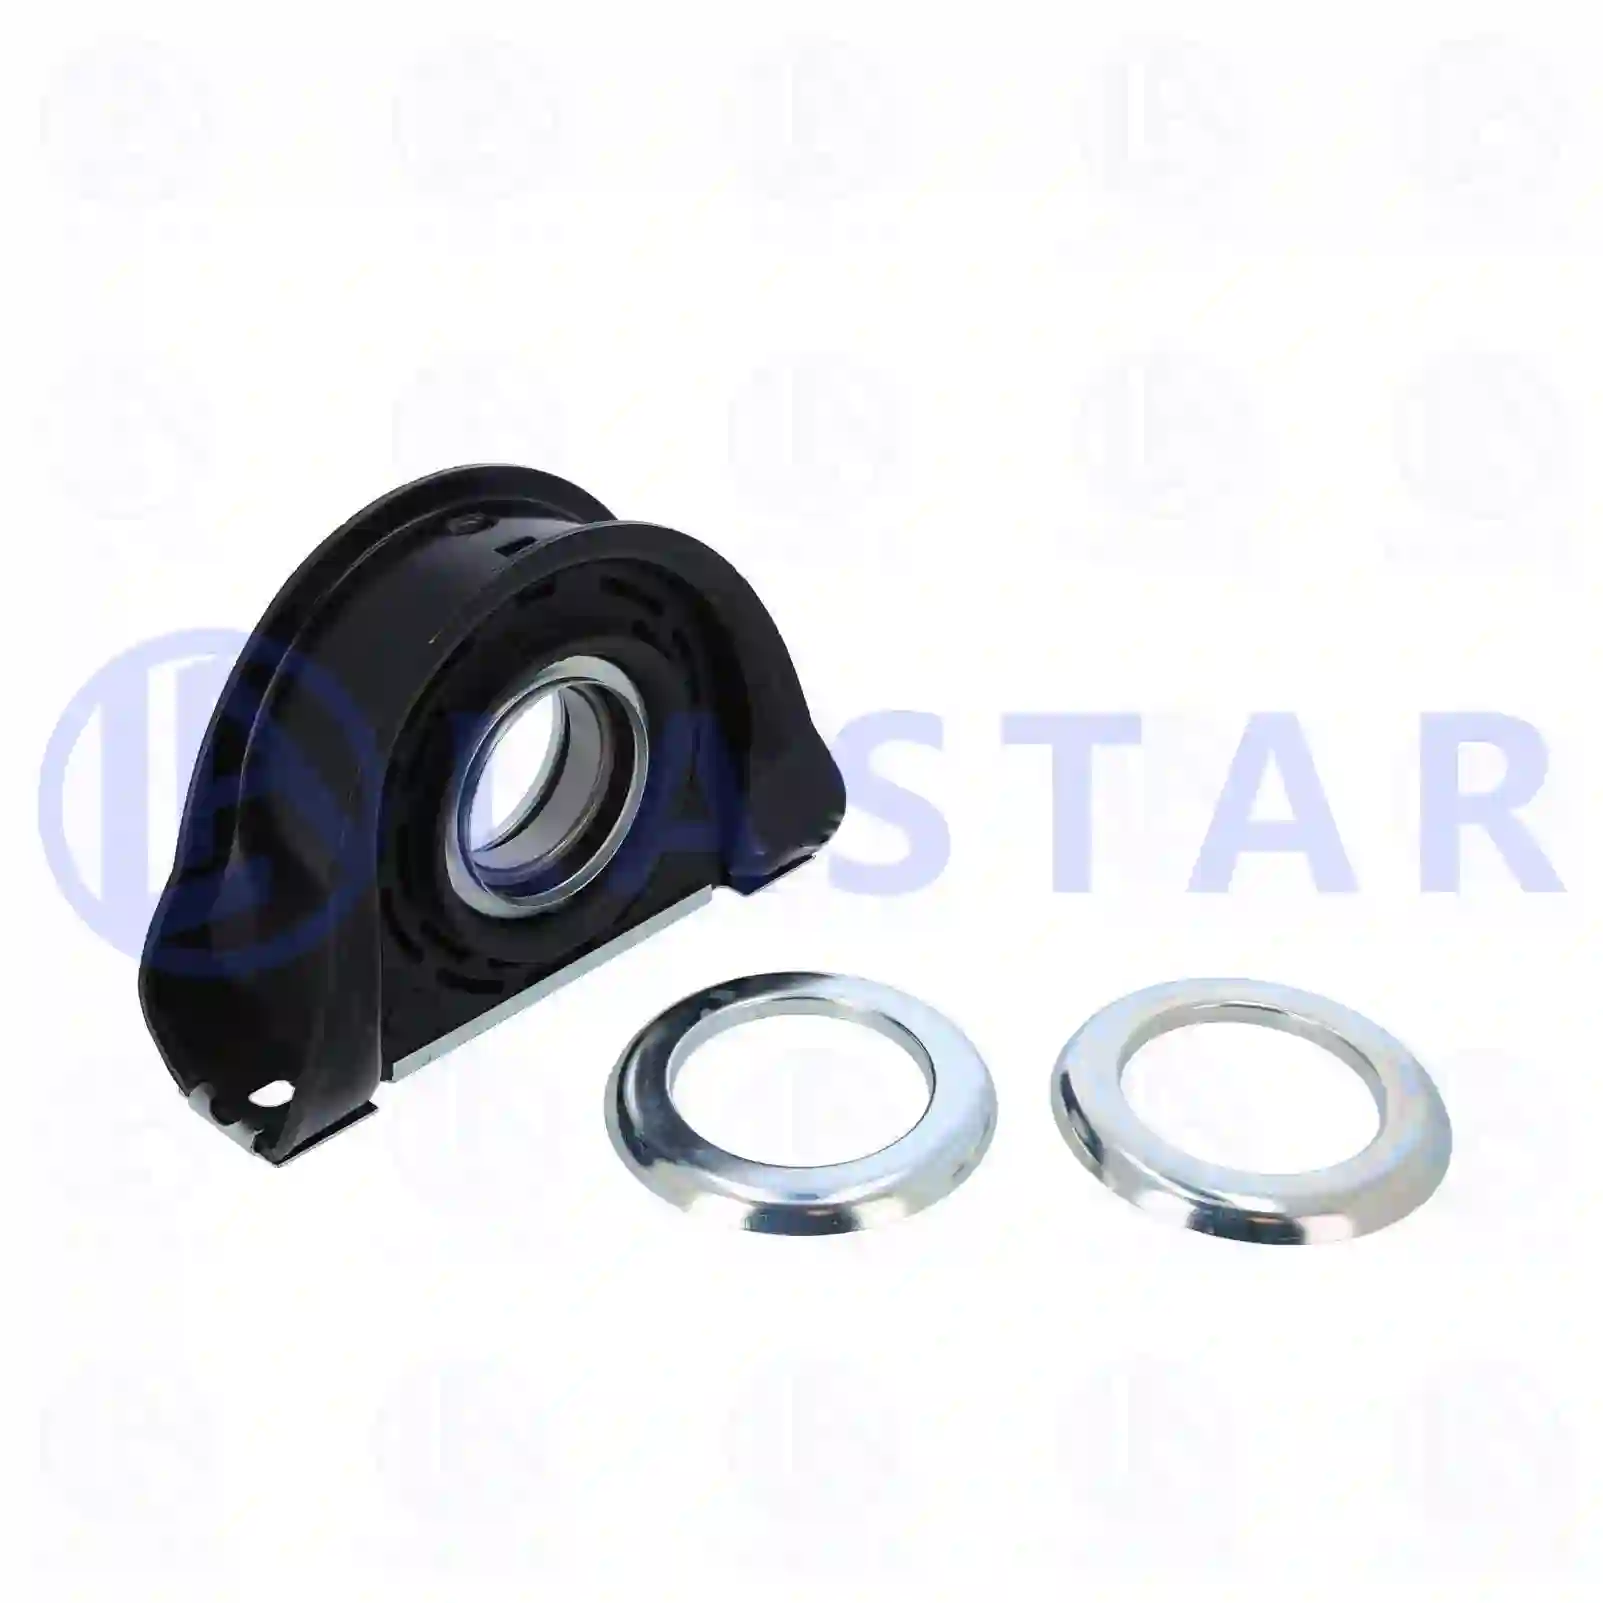 Support Bearing Center bearing, la no: 77734284 ,  oem no:1235569, ZG02493-0008 Lastar Spare Part | Truck Spare Parts, Auotomotive Spare Parts